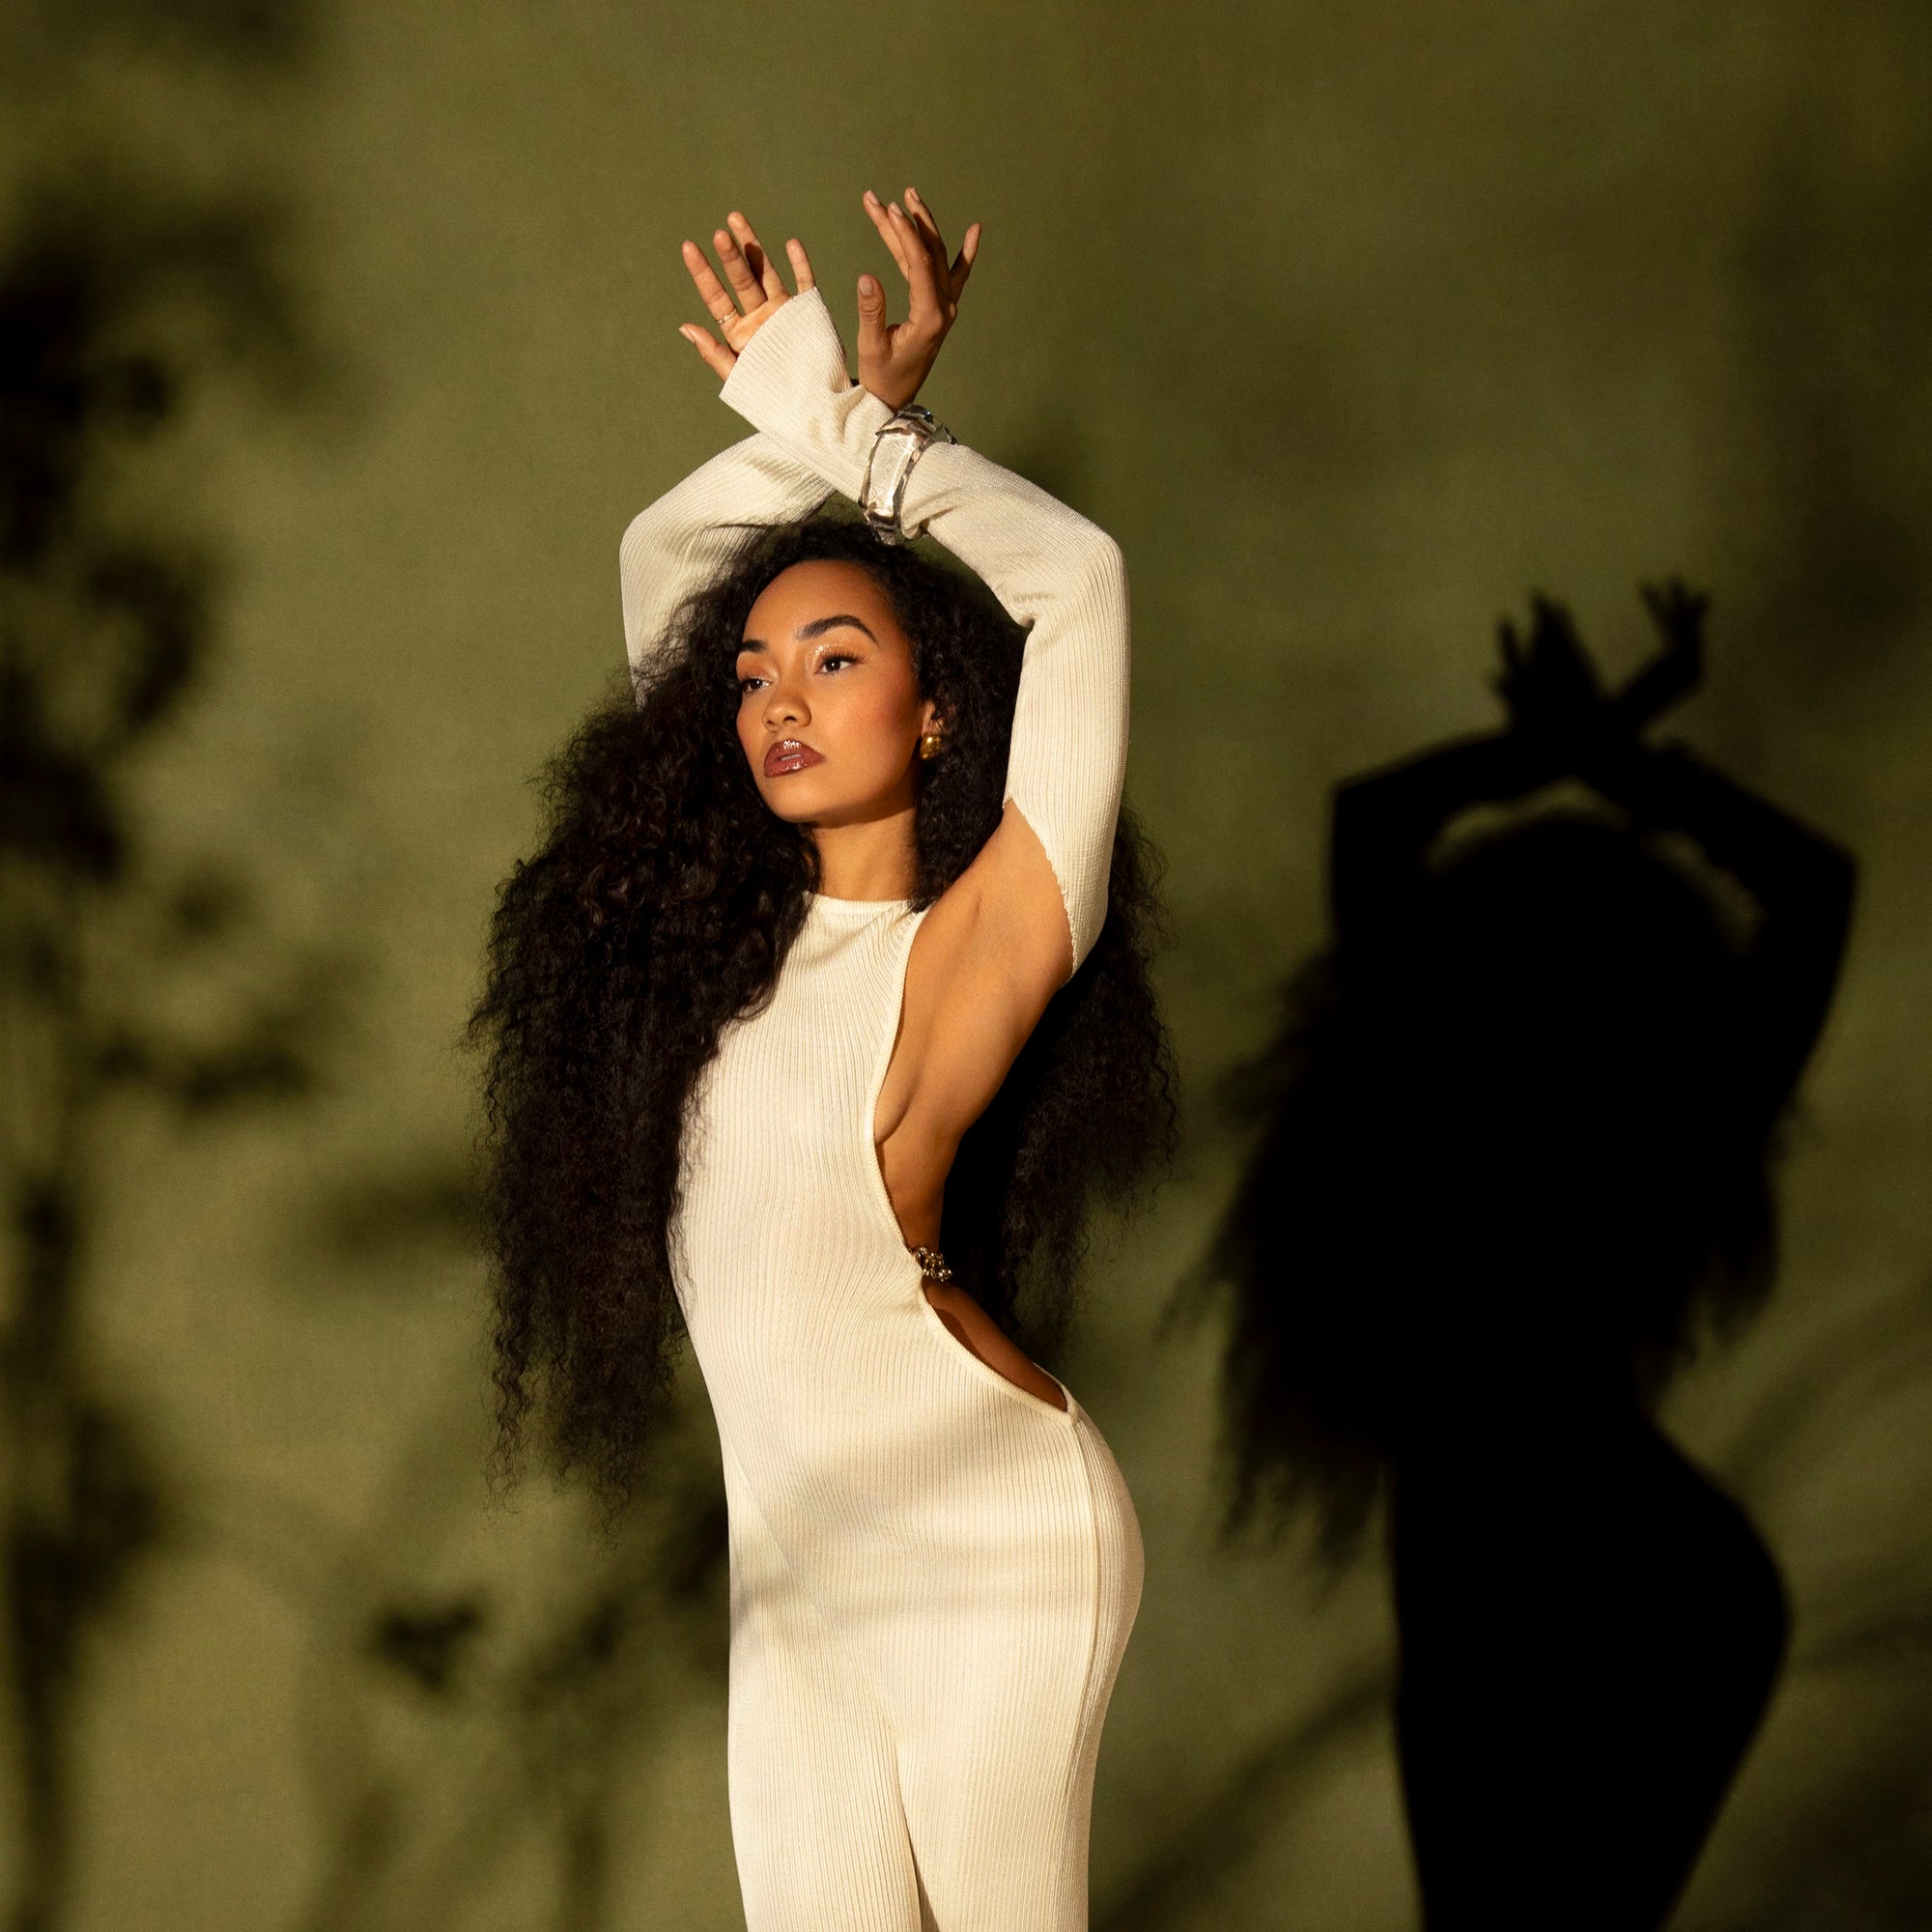 Leigh-Anne Embraces Temptation in New Track ‘Forbidden Fruit’